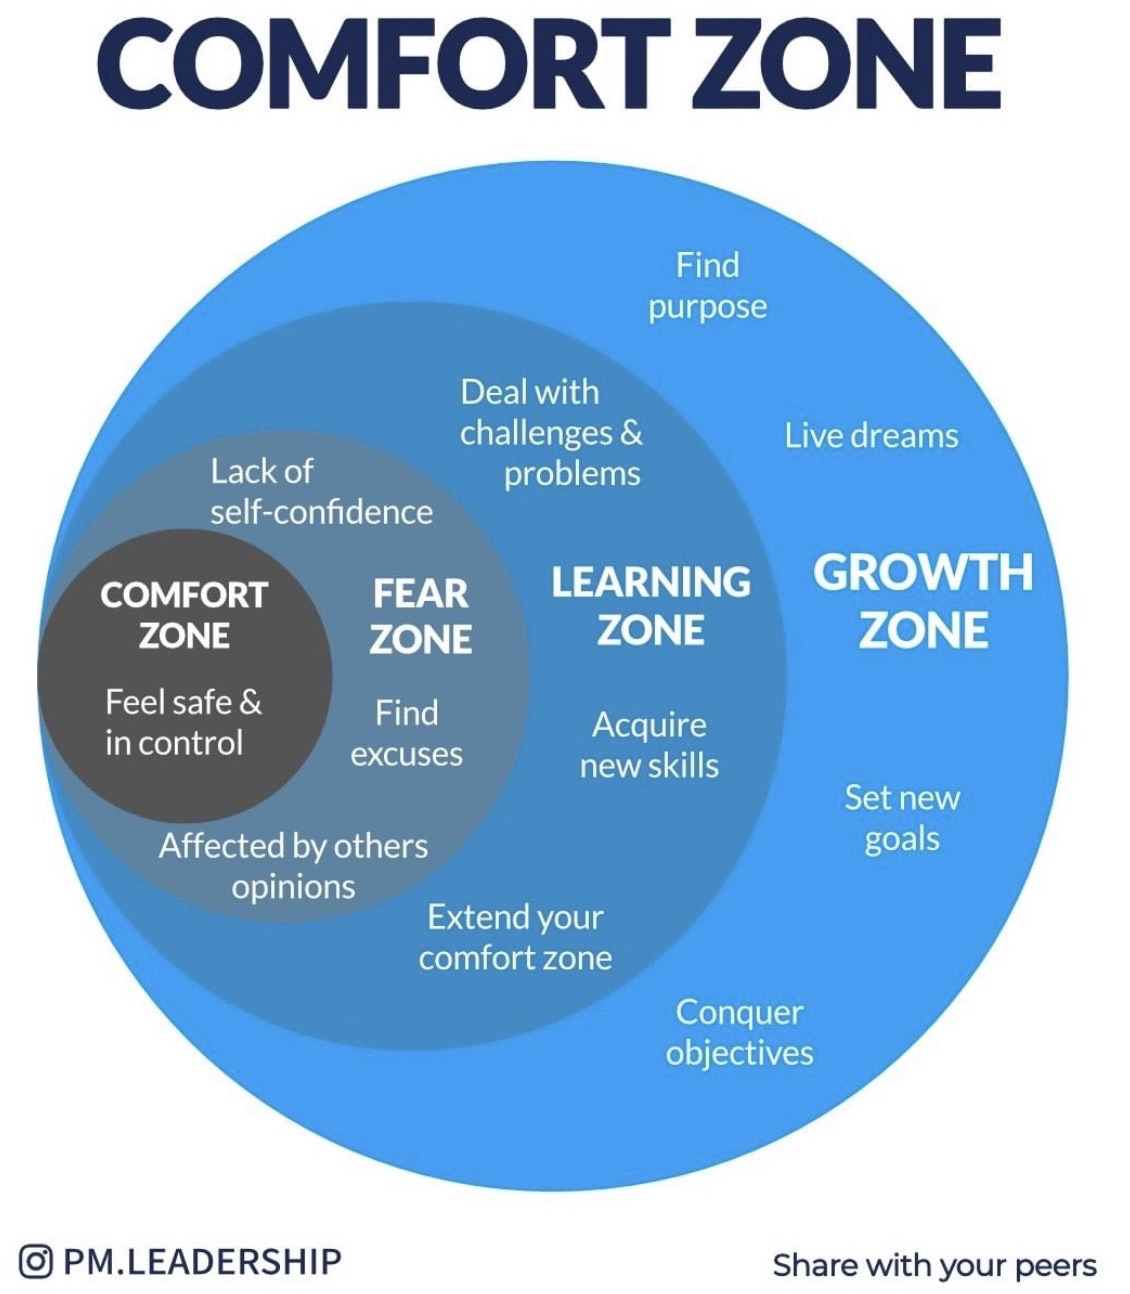 THE COMFORT ZONE MODEL? – CAMHS Professionals